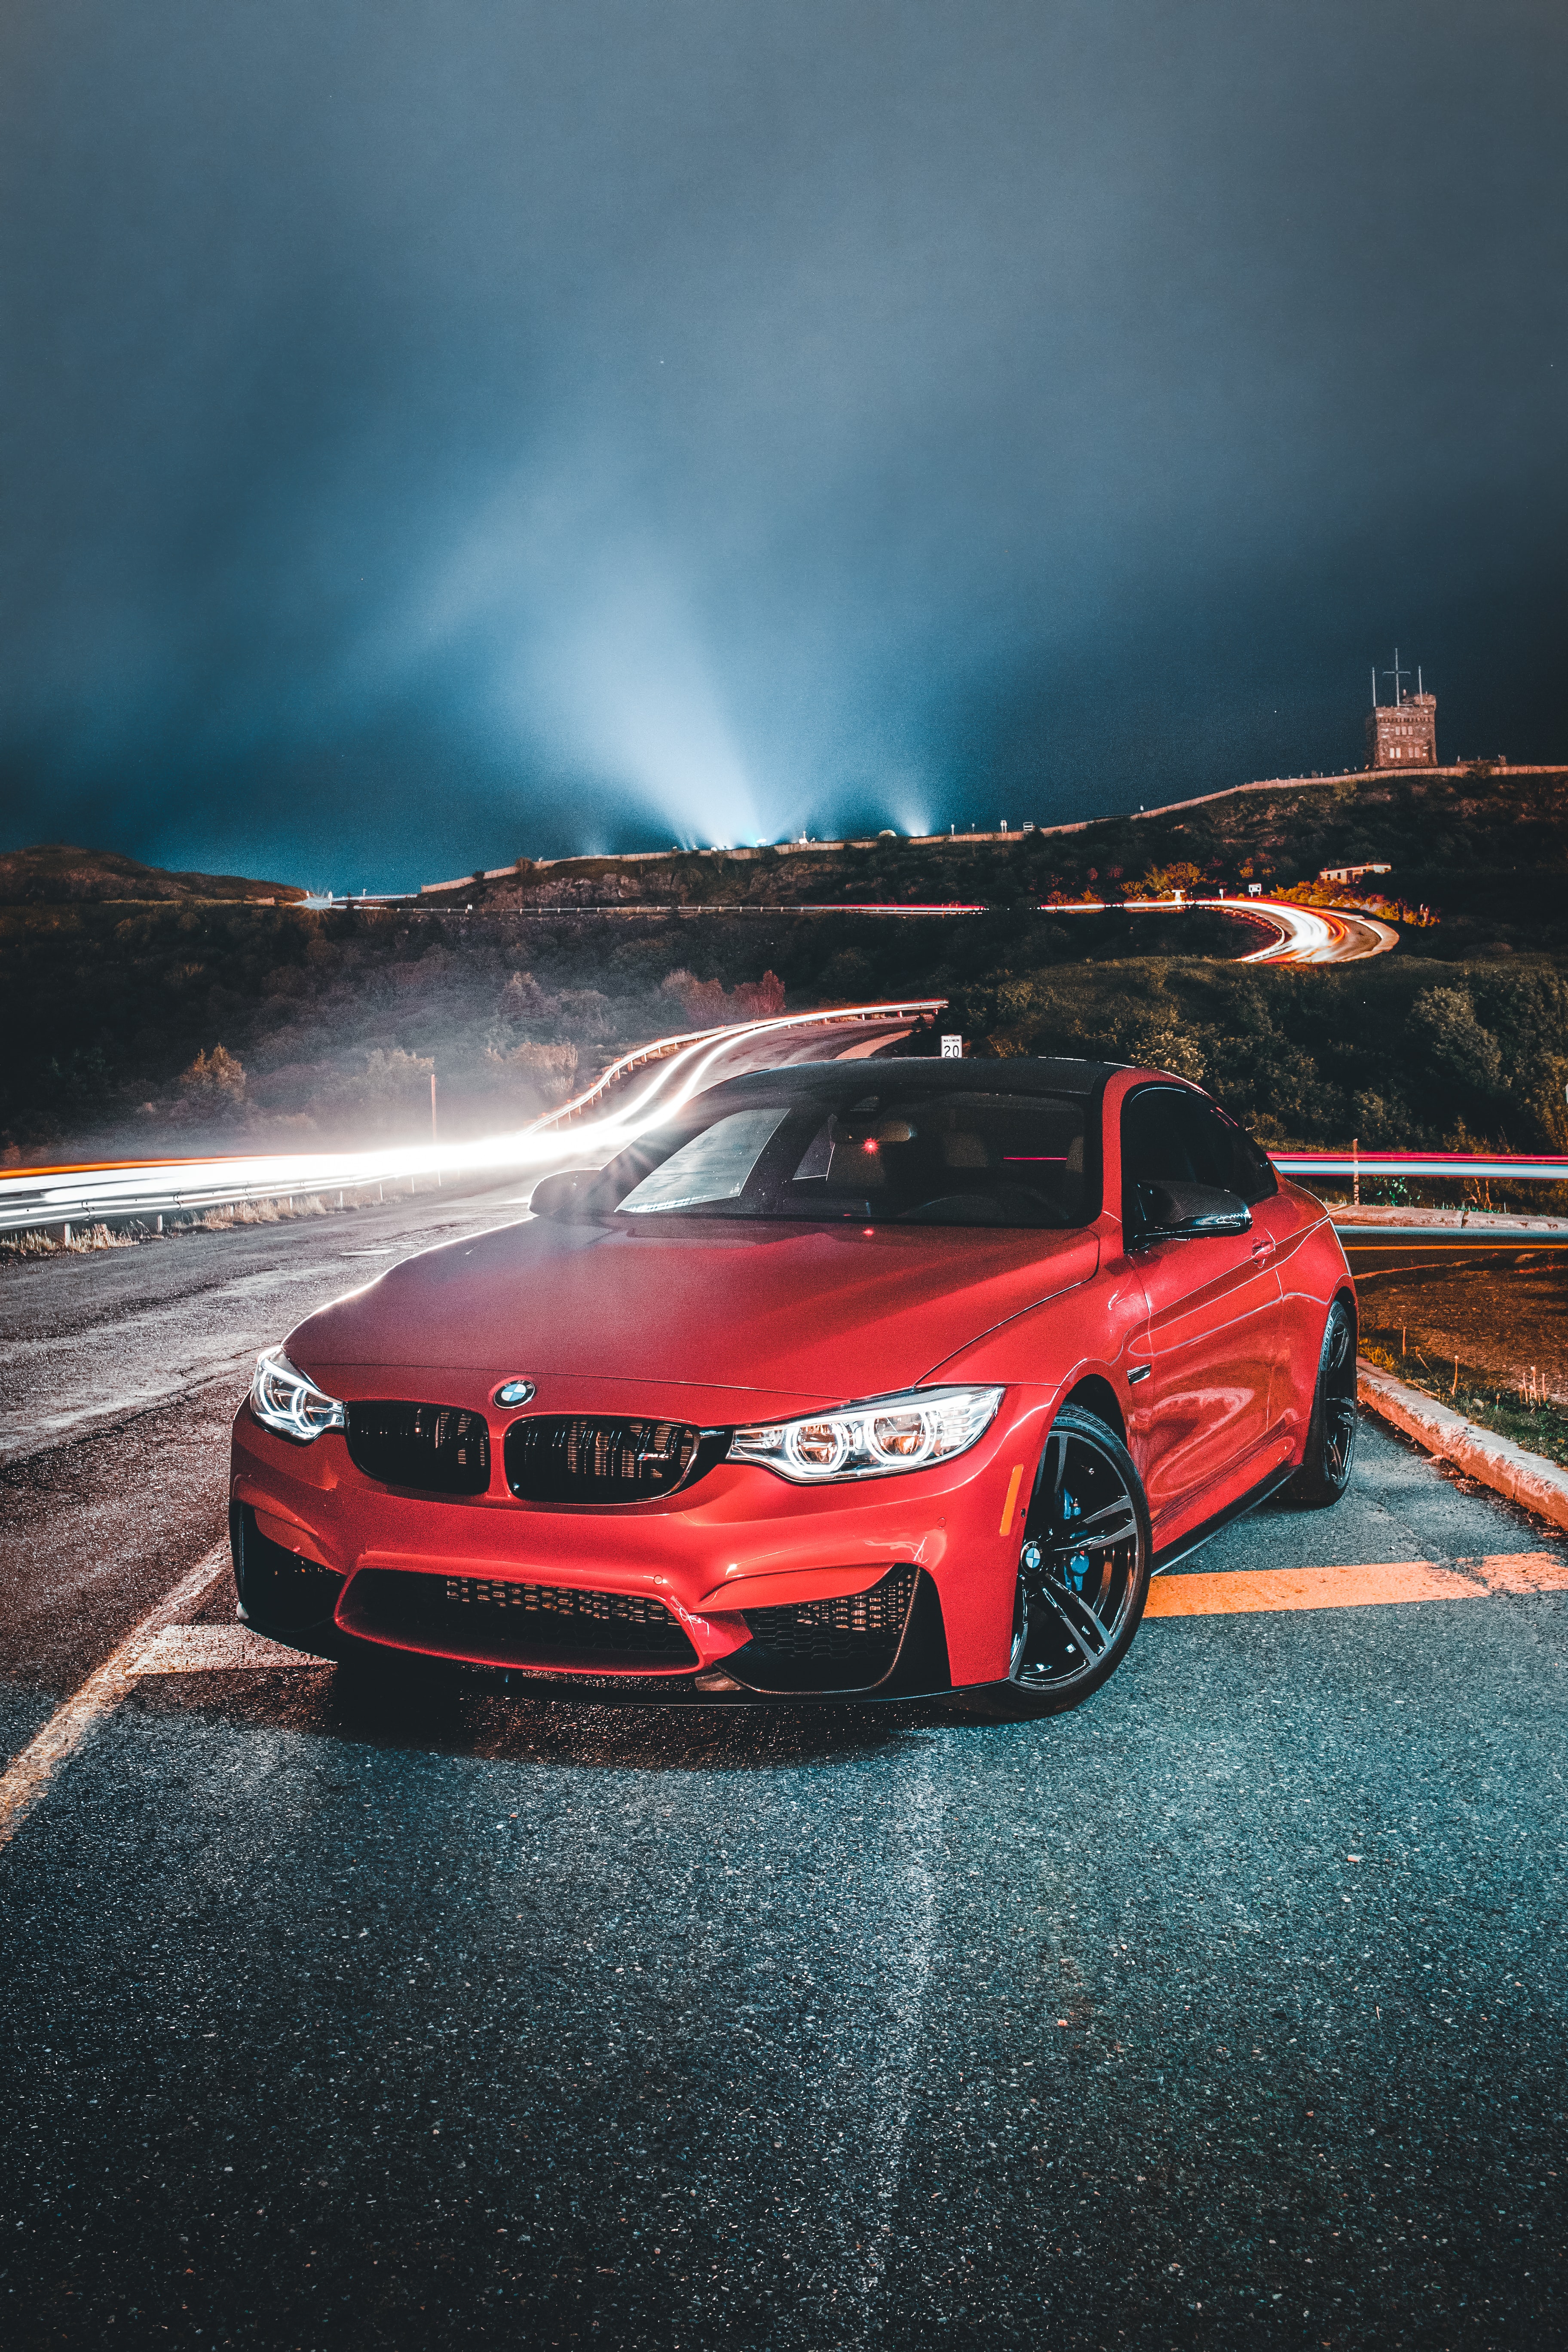 bmw, front view, cars, red, road, car, machine, bmw 320i 1080p